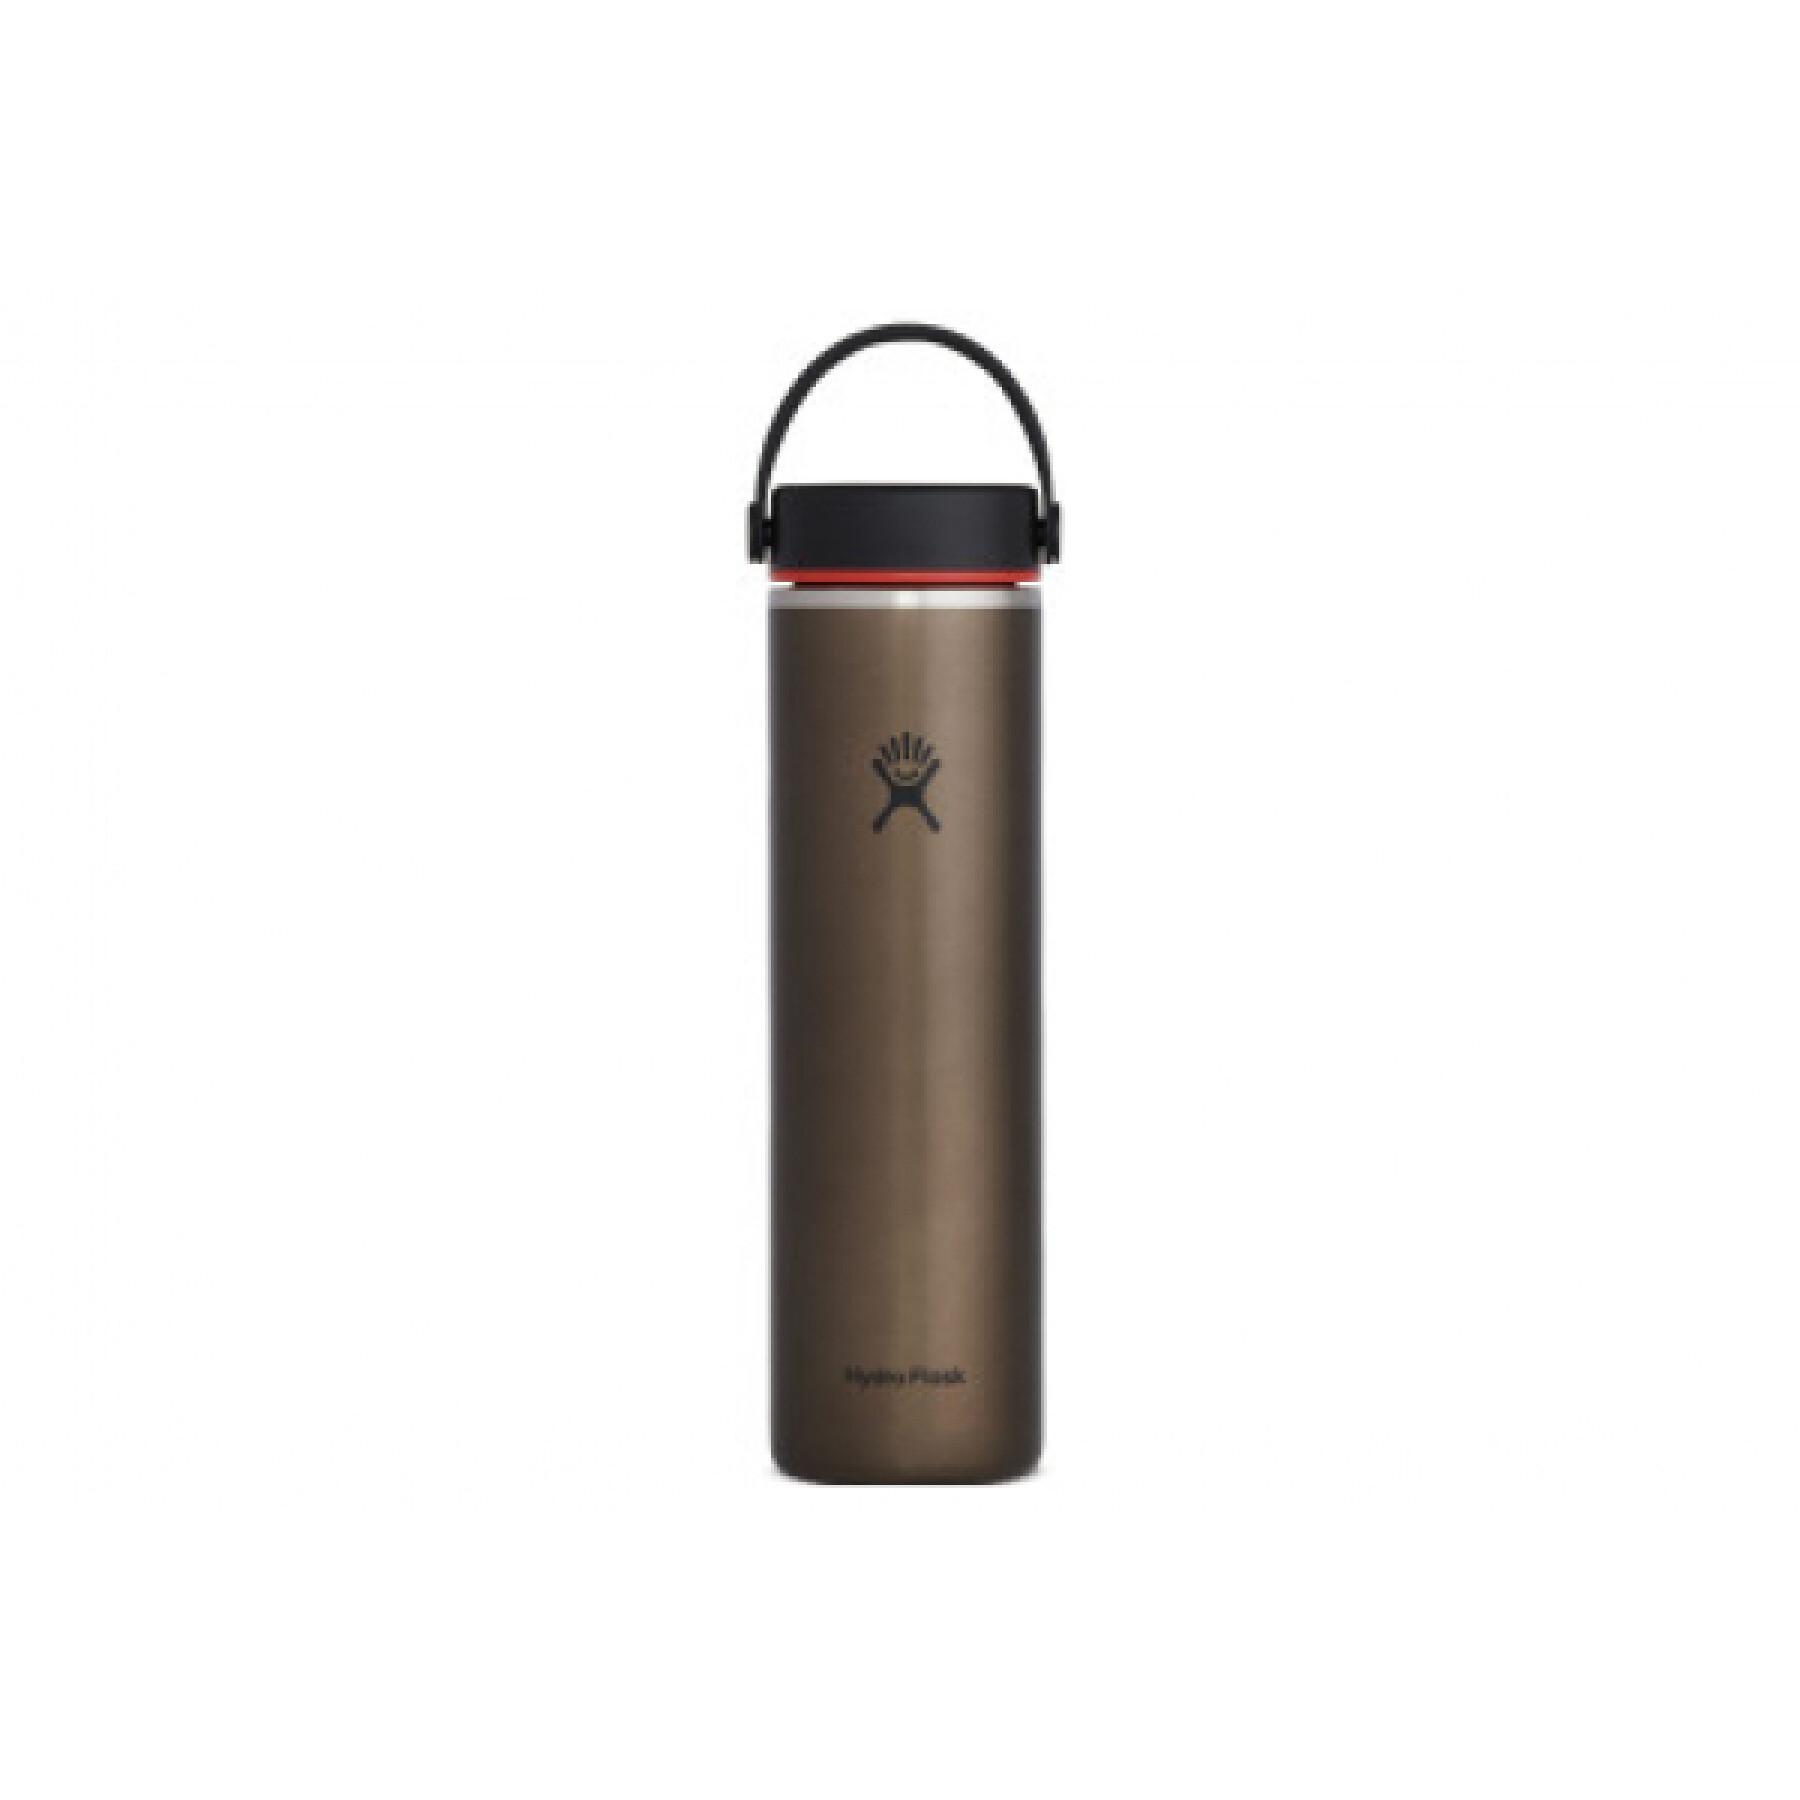 Standardtermos Hydro Flask with mouth standard lex cap 24 oz